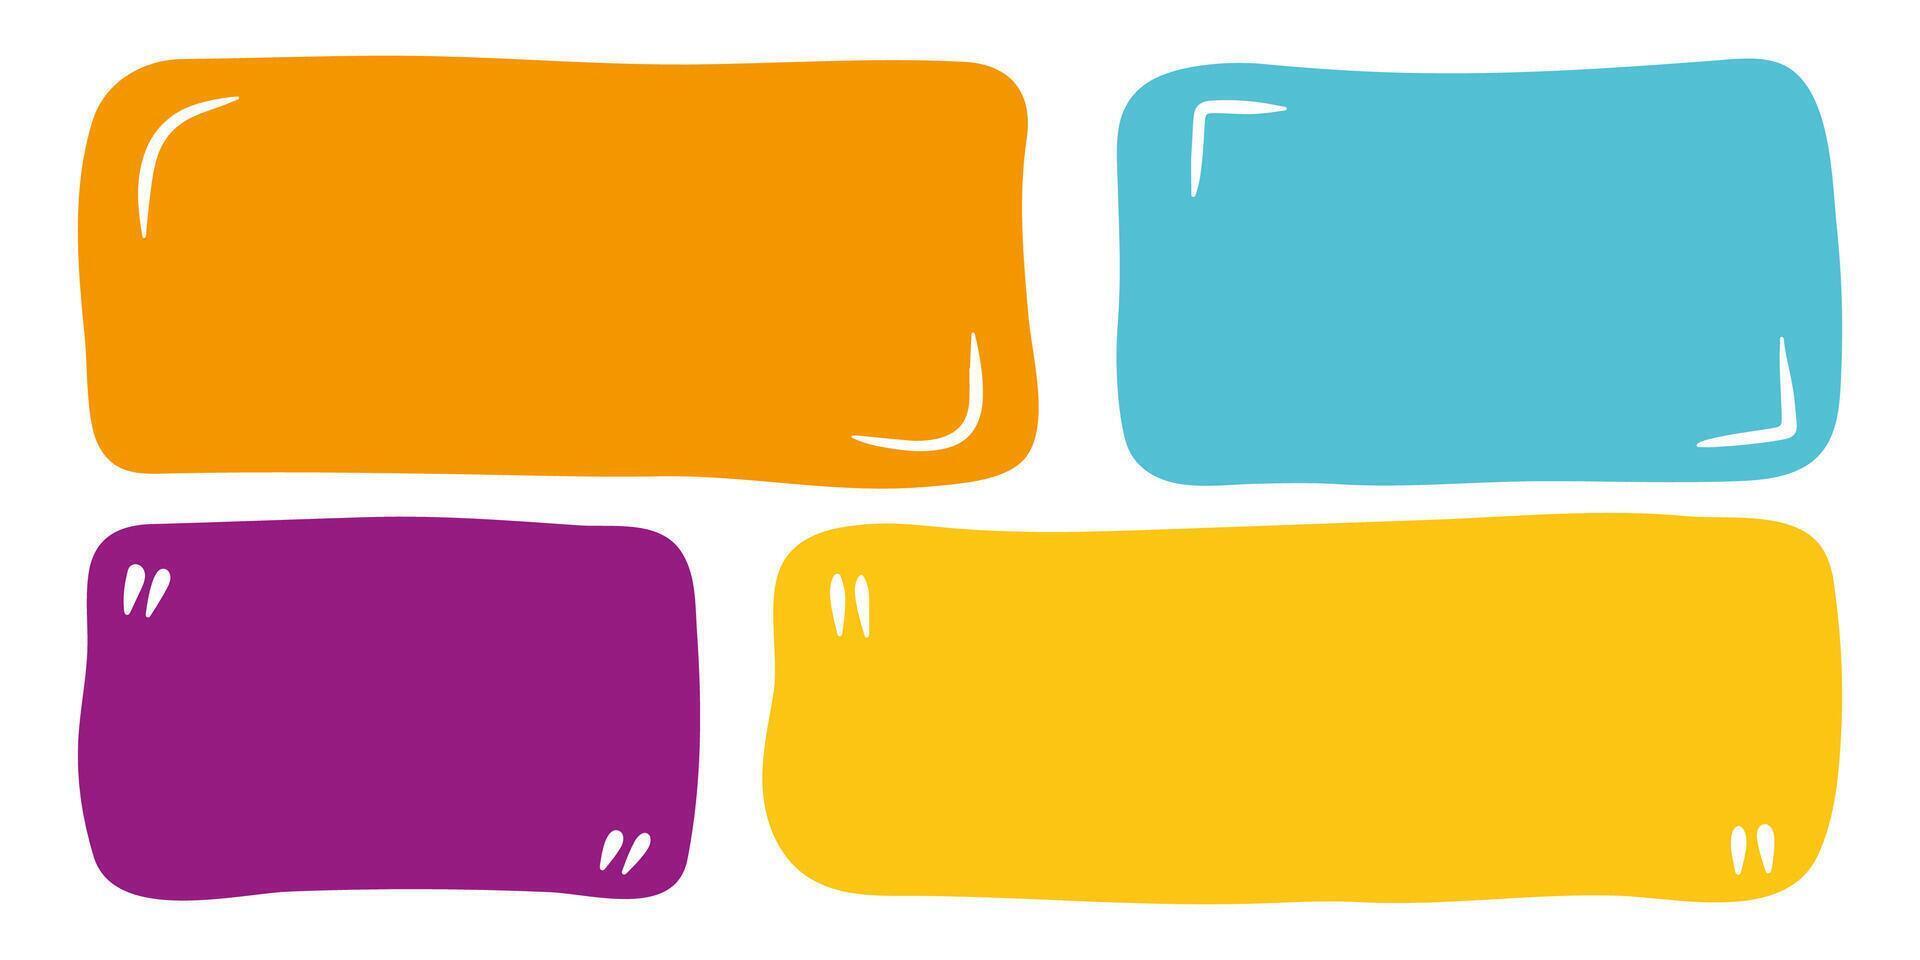 Doodle vector shapes and frames for social media. Color abstract text box. Hand drawn speech bubble blobs for dialog